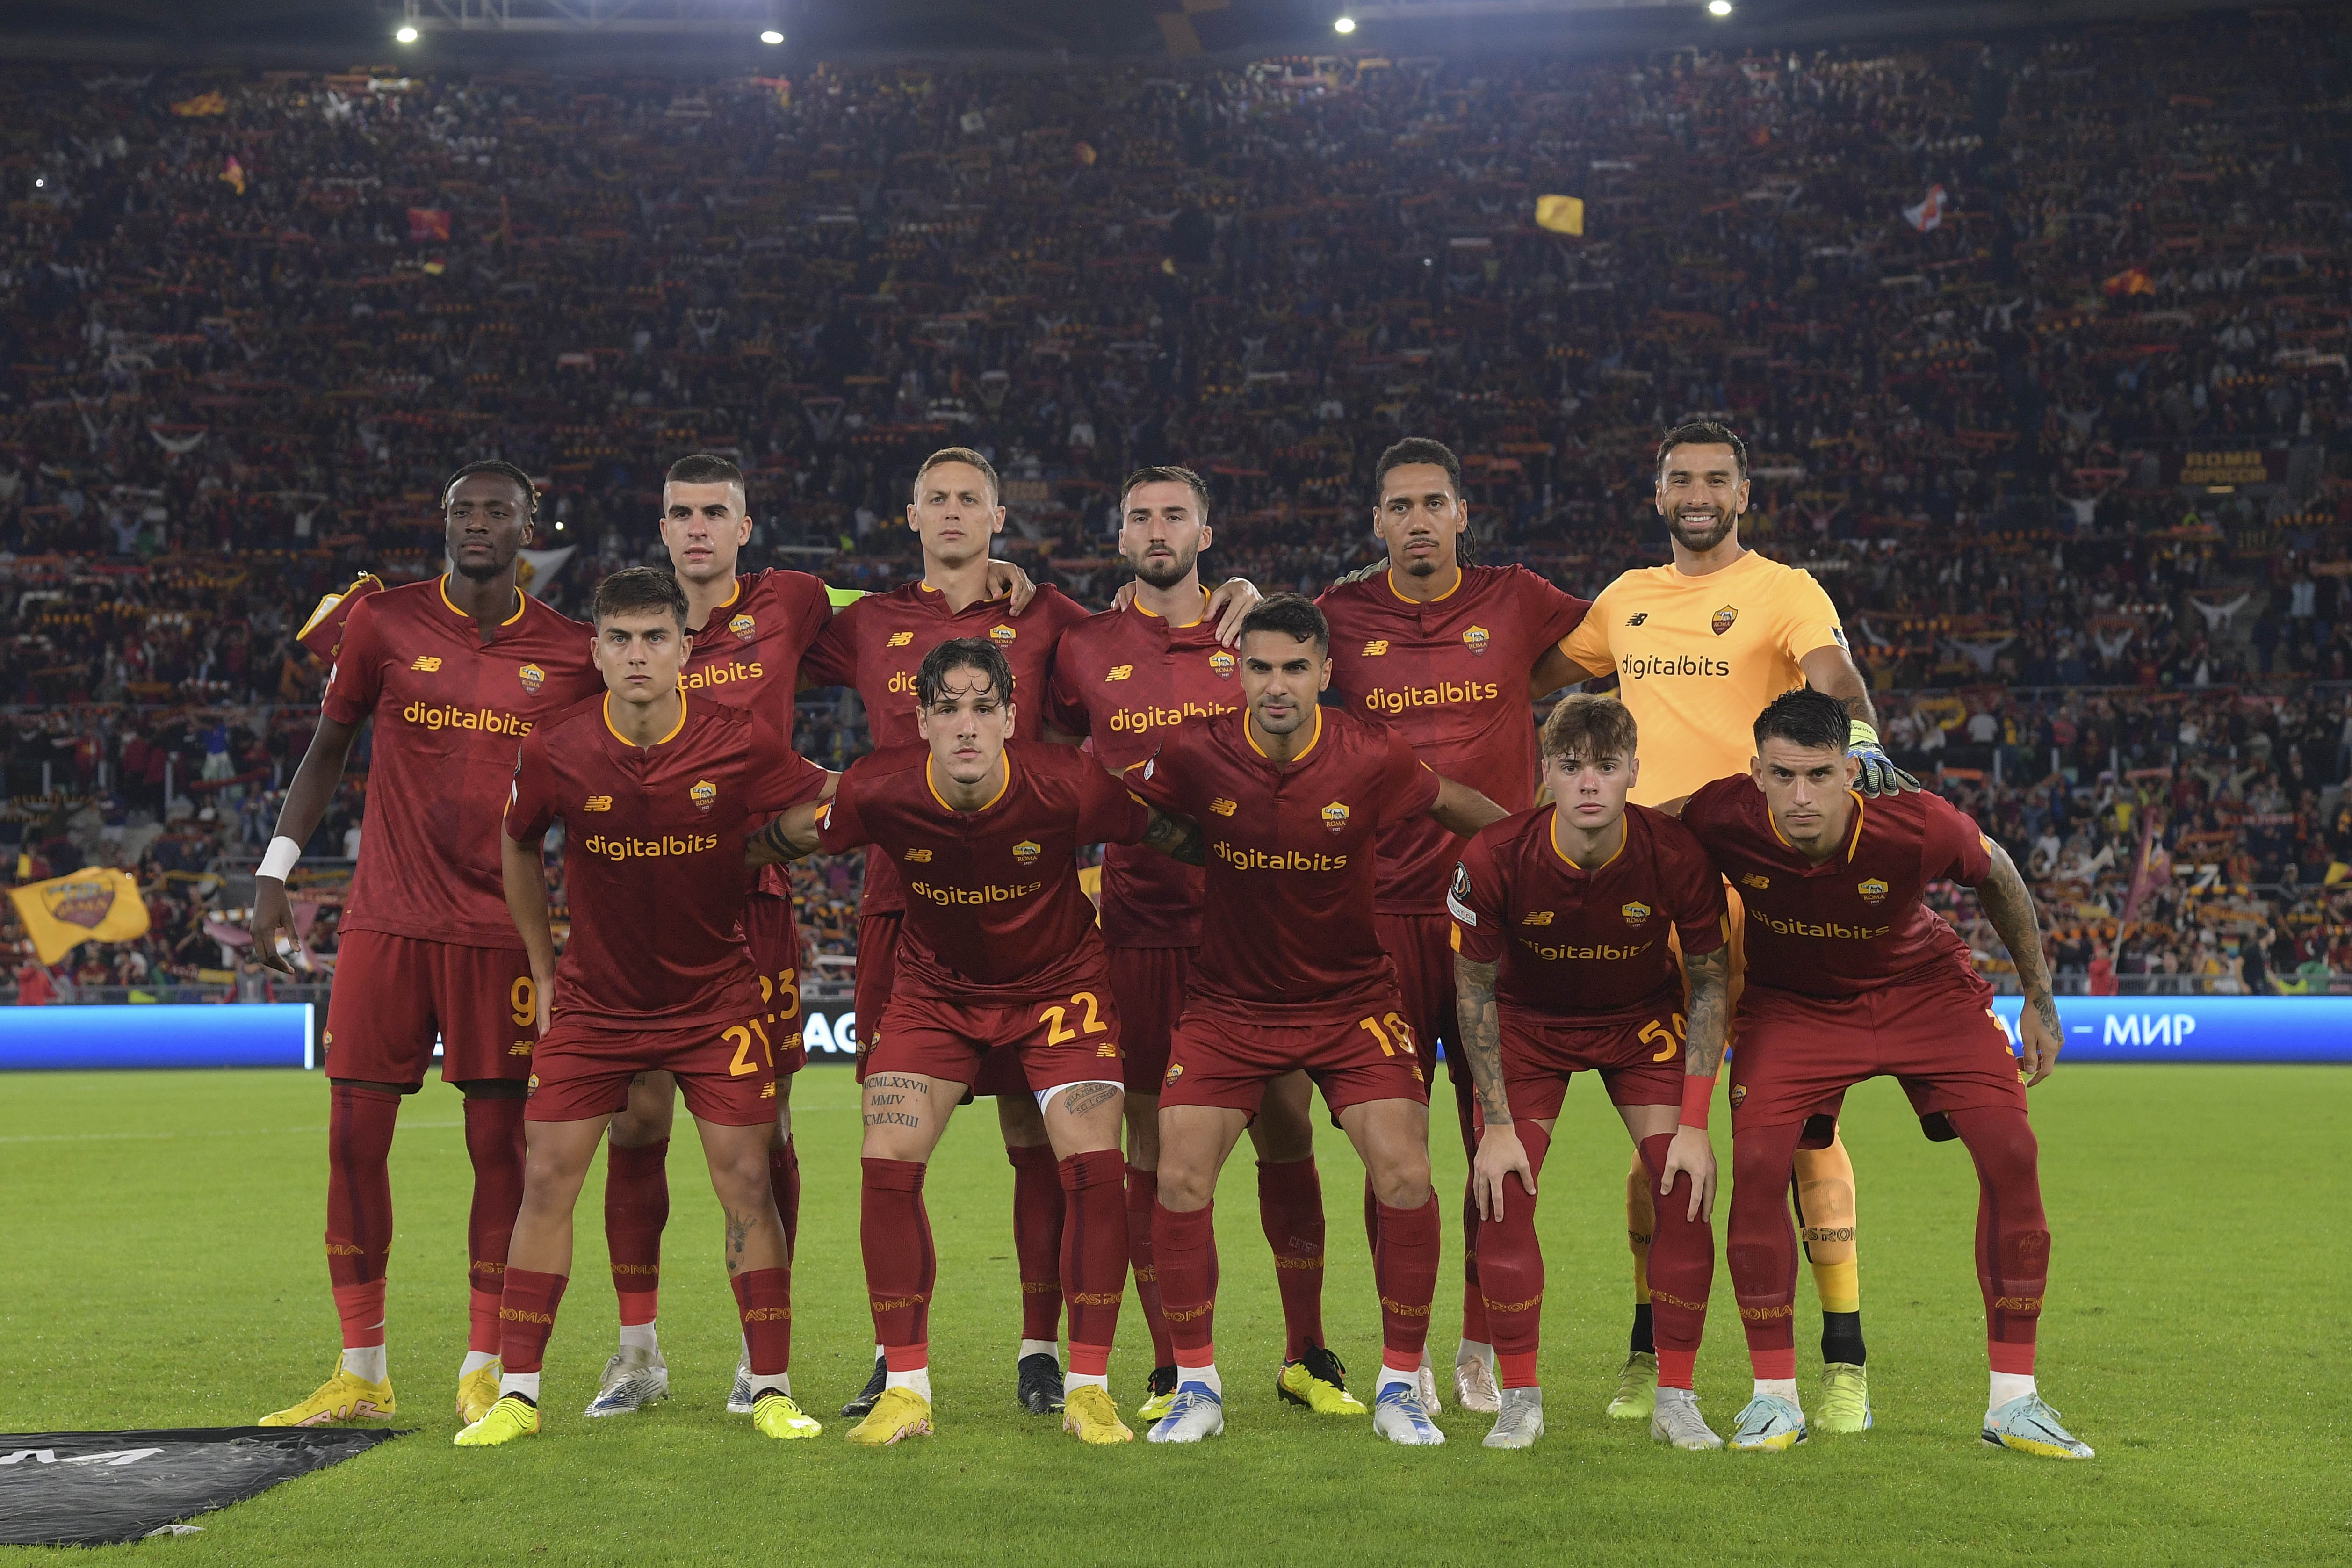 The starting line up of last week's defeat against Betis